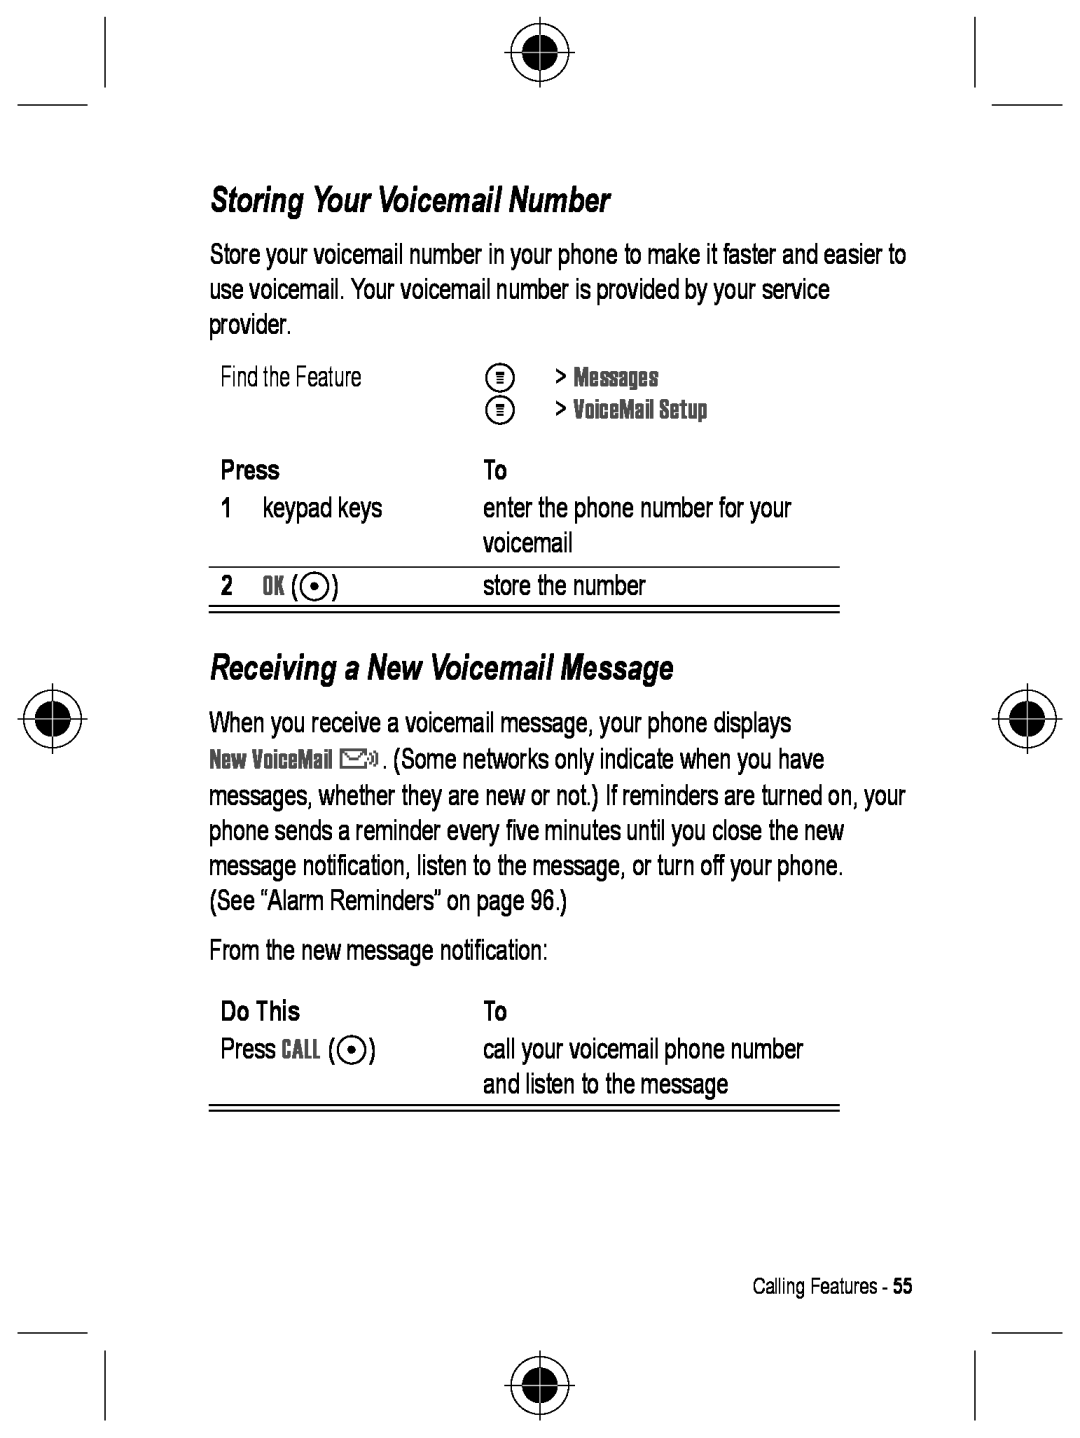 Motorola C330 manual Storing Your Voicemail Number, Receiving a New Voicemail Message, M Messages, M VoiceMail Setup, Ok + 